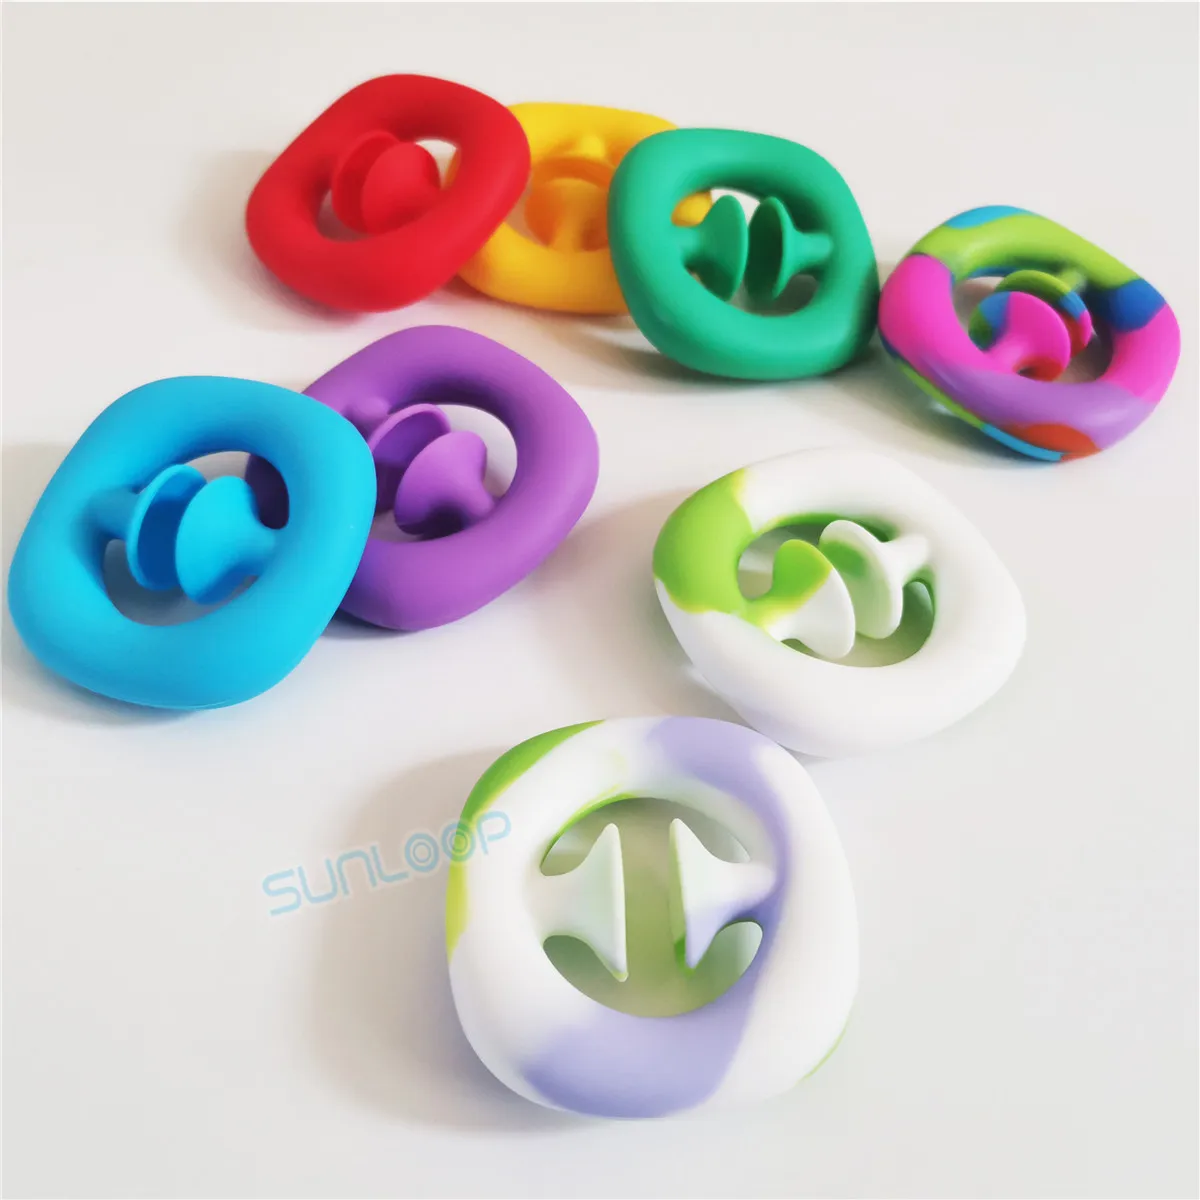 

Snappers Finger Sensory Fidget Toy Party Popper Noise Maker Grab and Snap Hand sniper antistress simple dimpl Squeeze Toys Adult